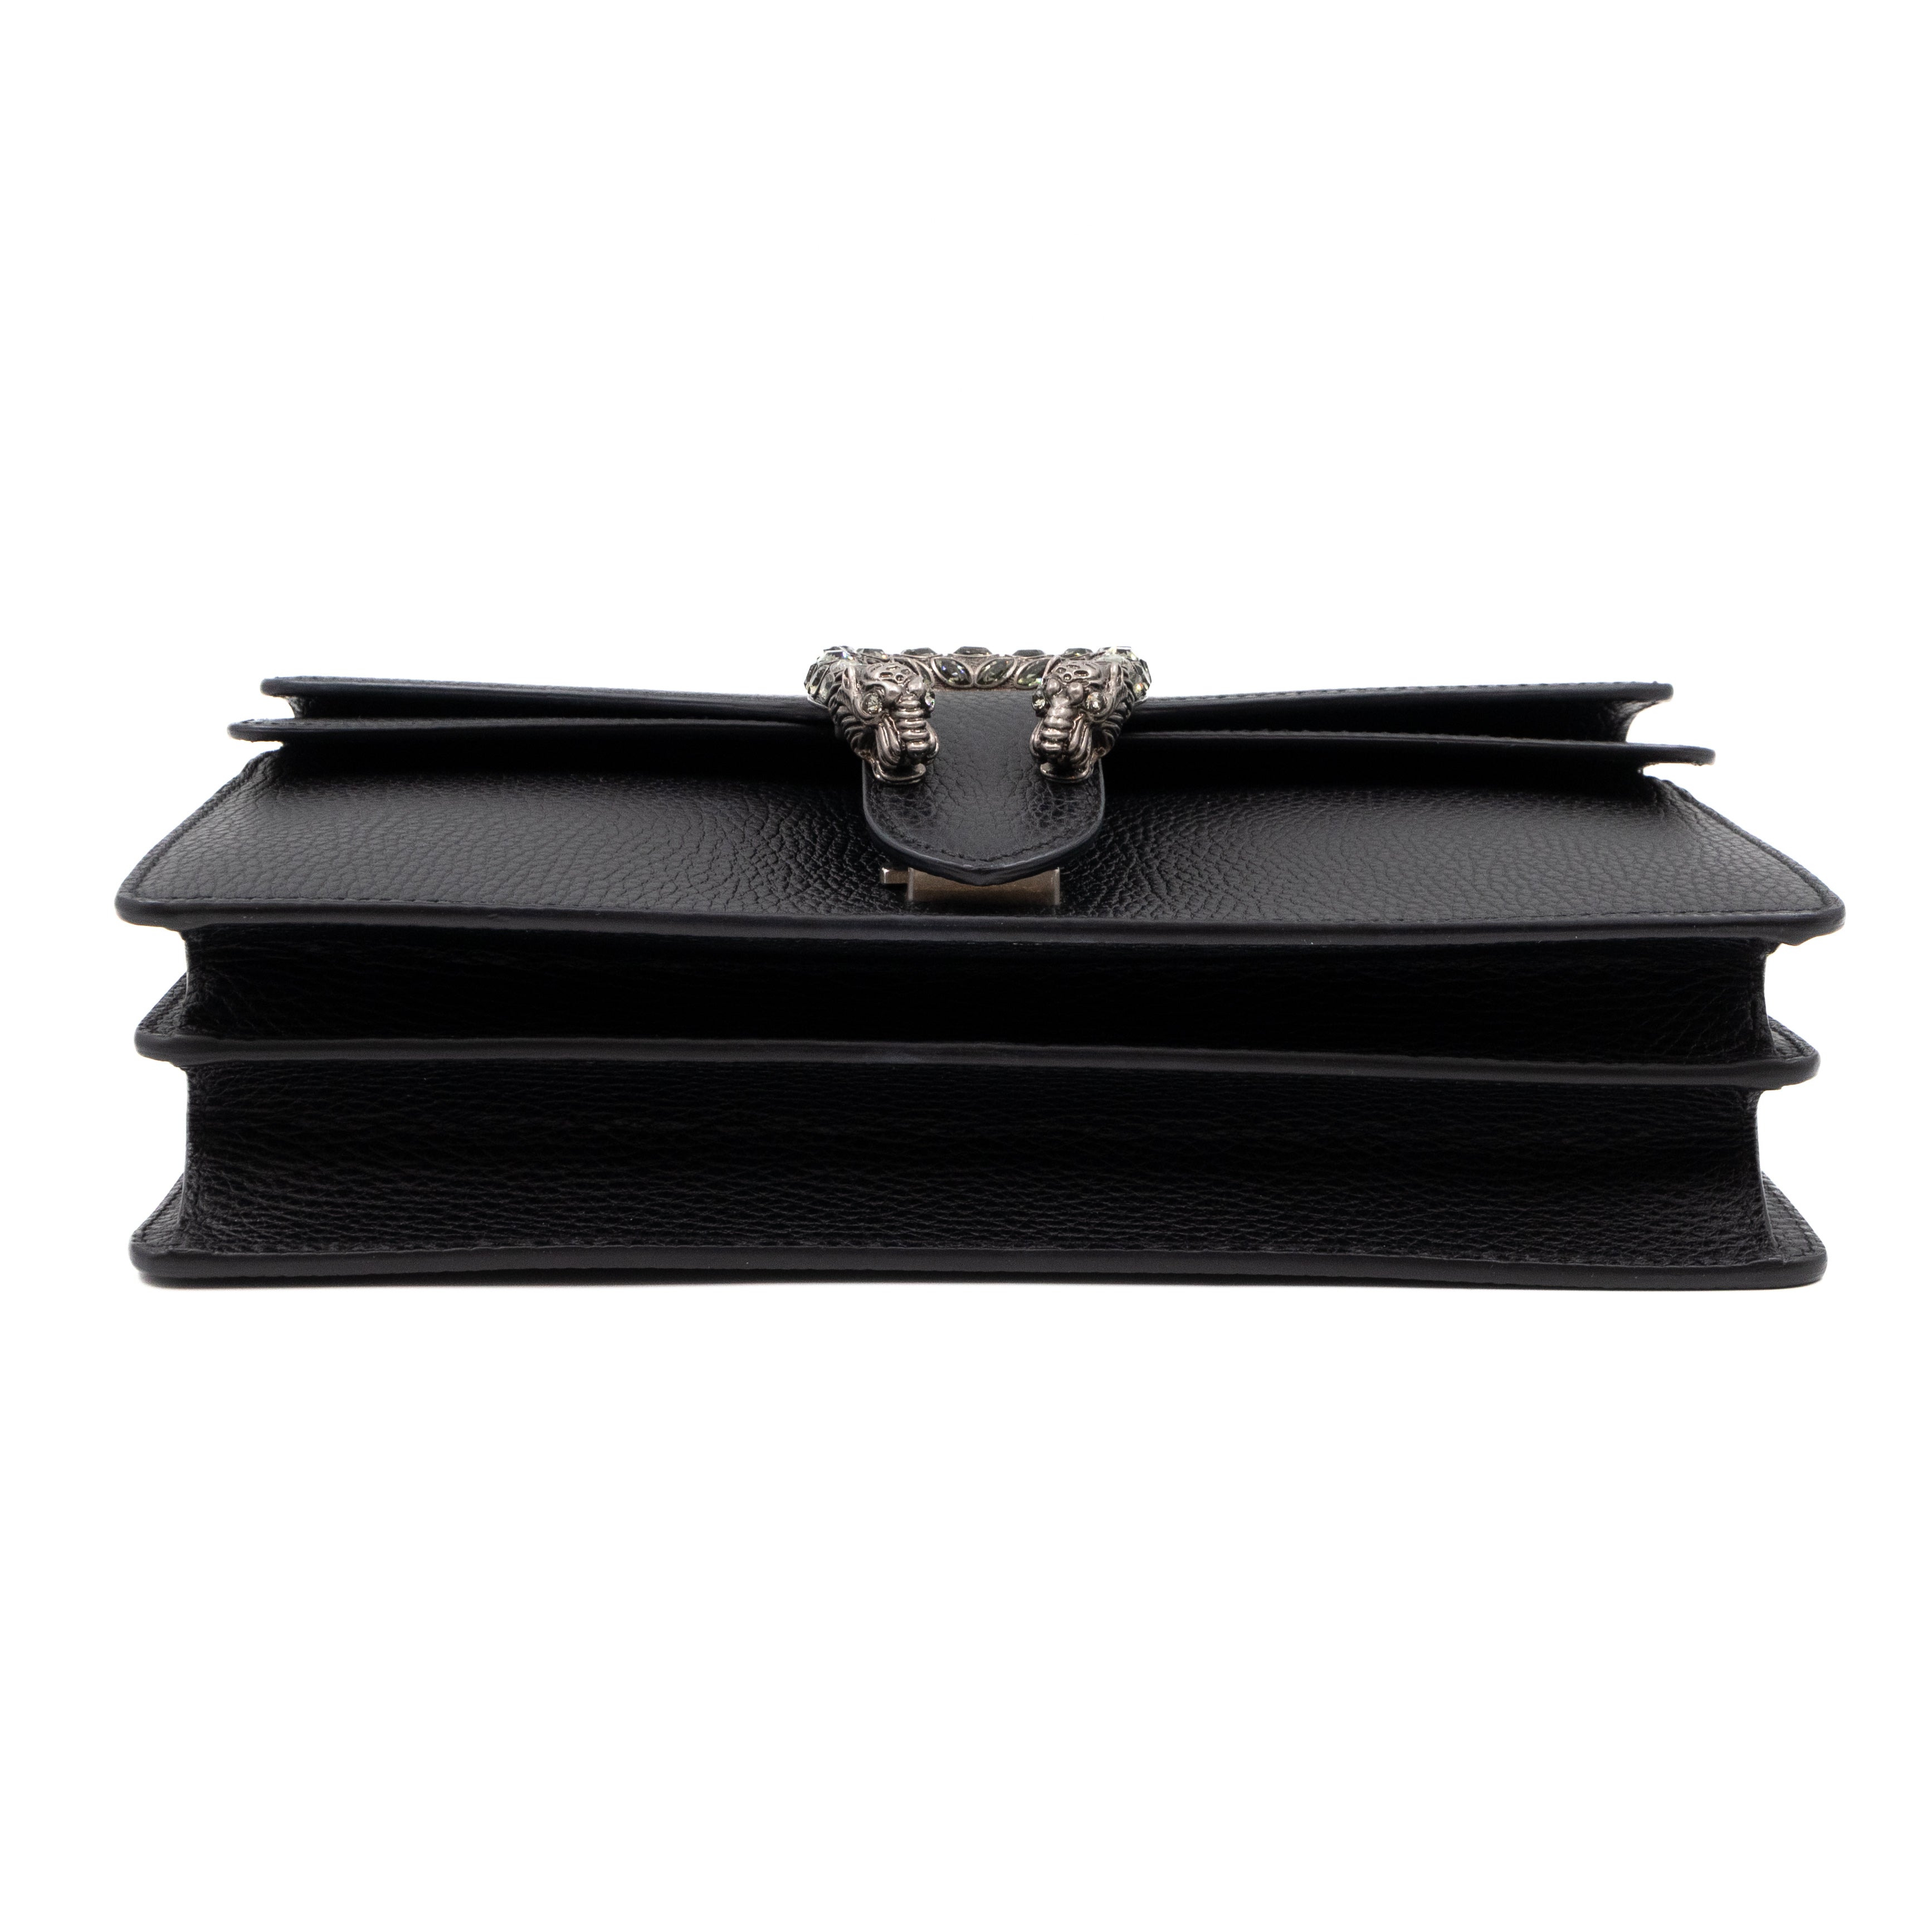 Gucci - Soho Black Leather Top Handle Small Tote